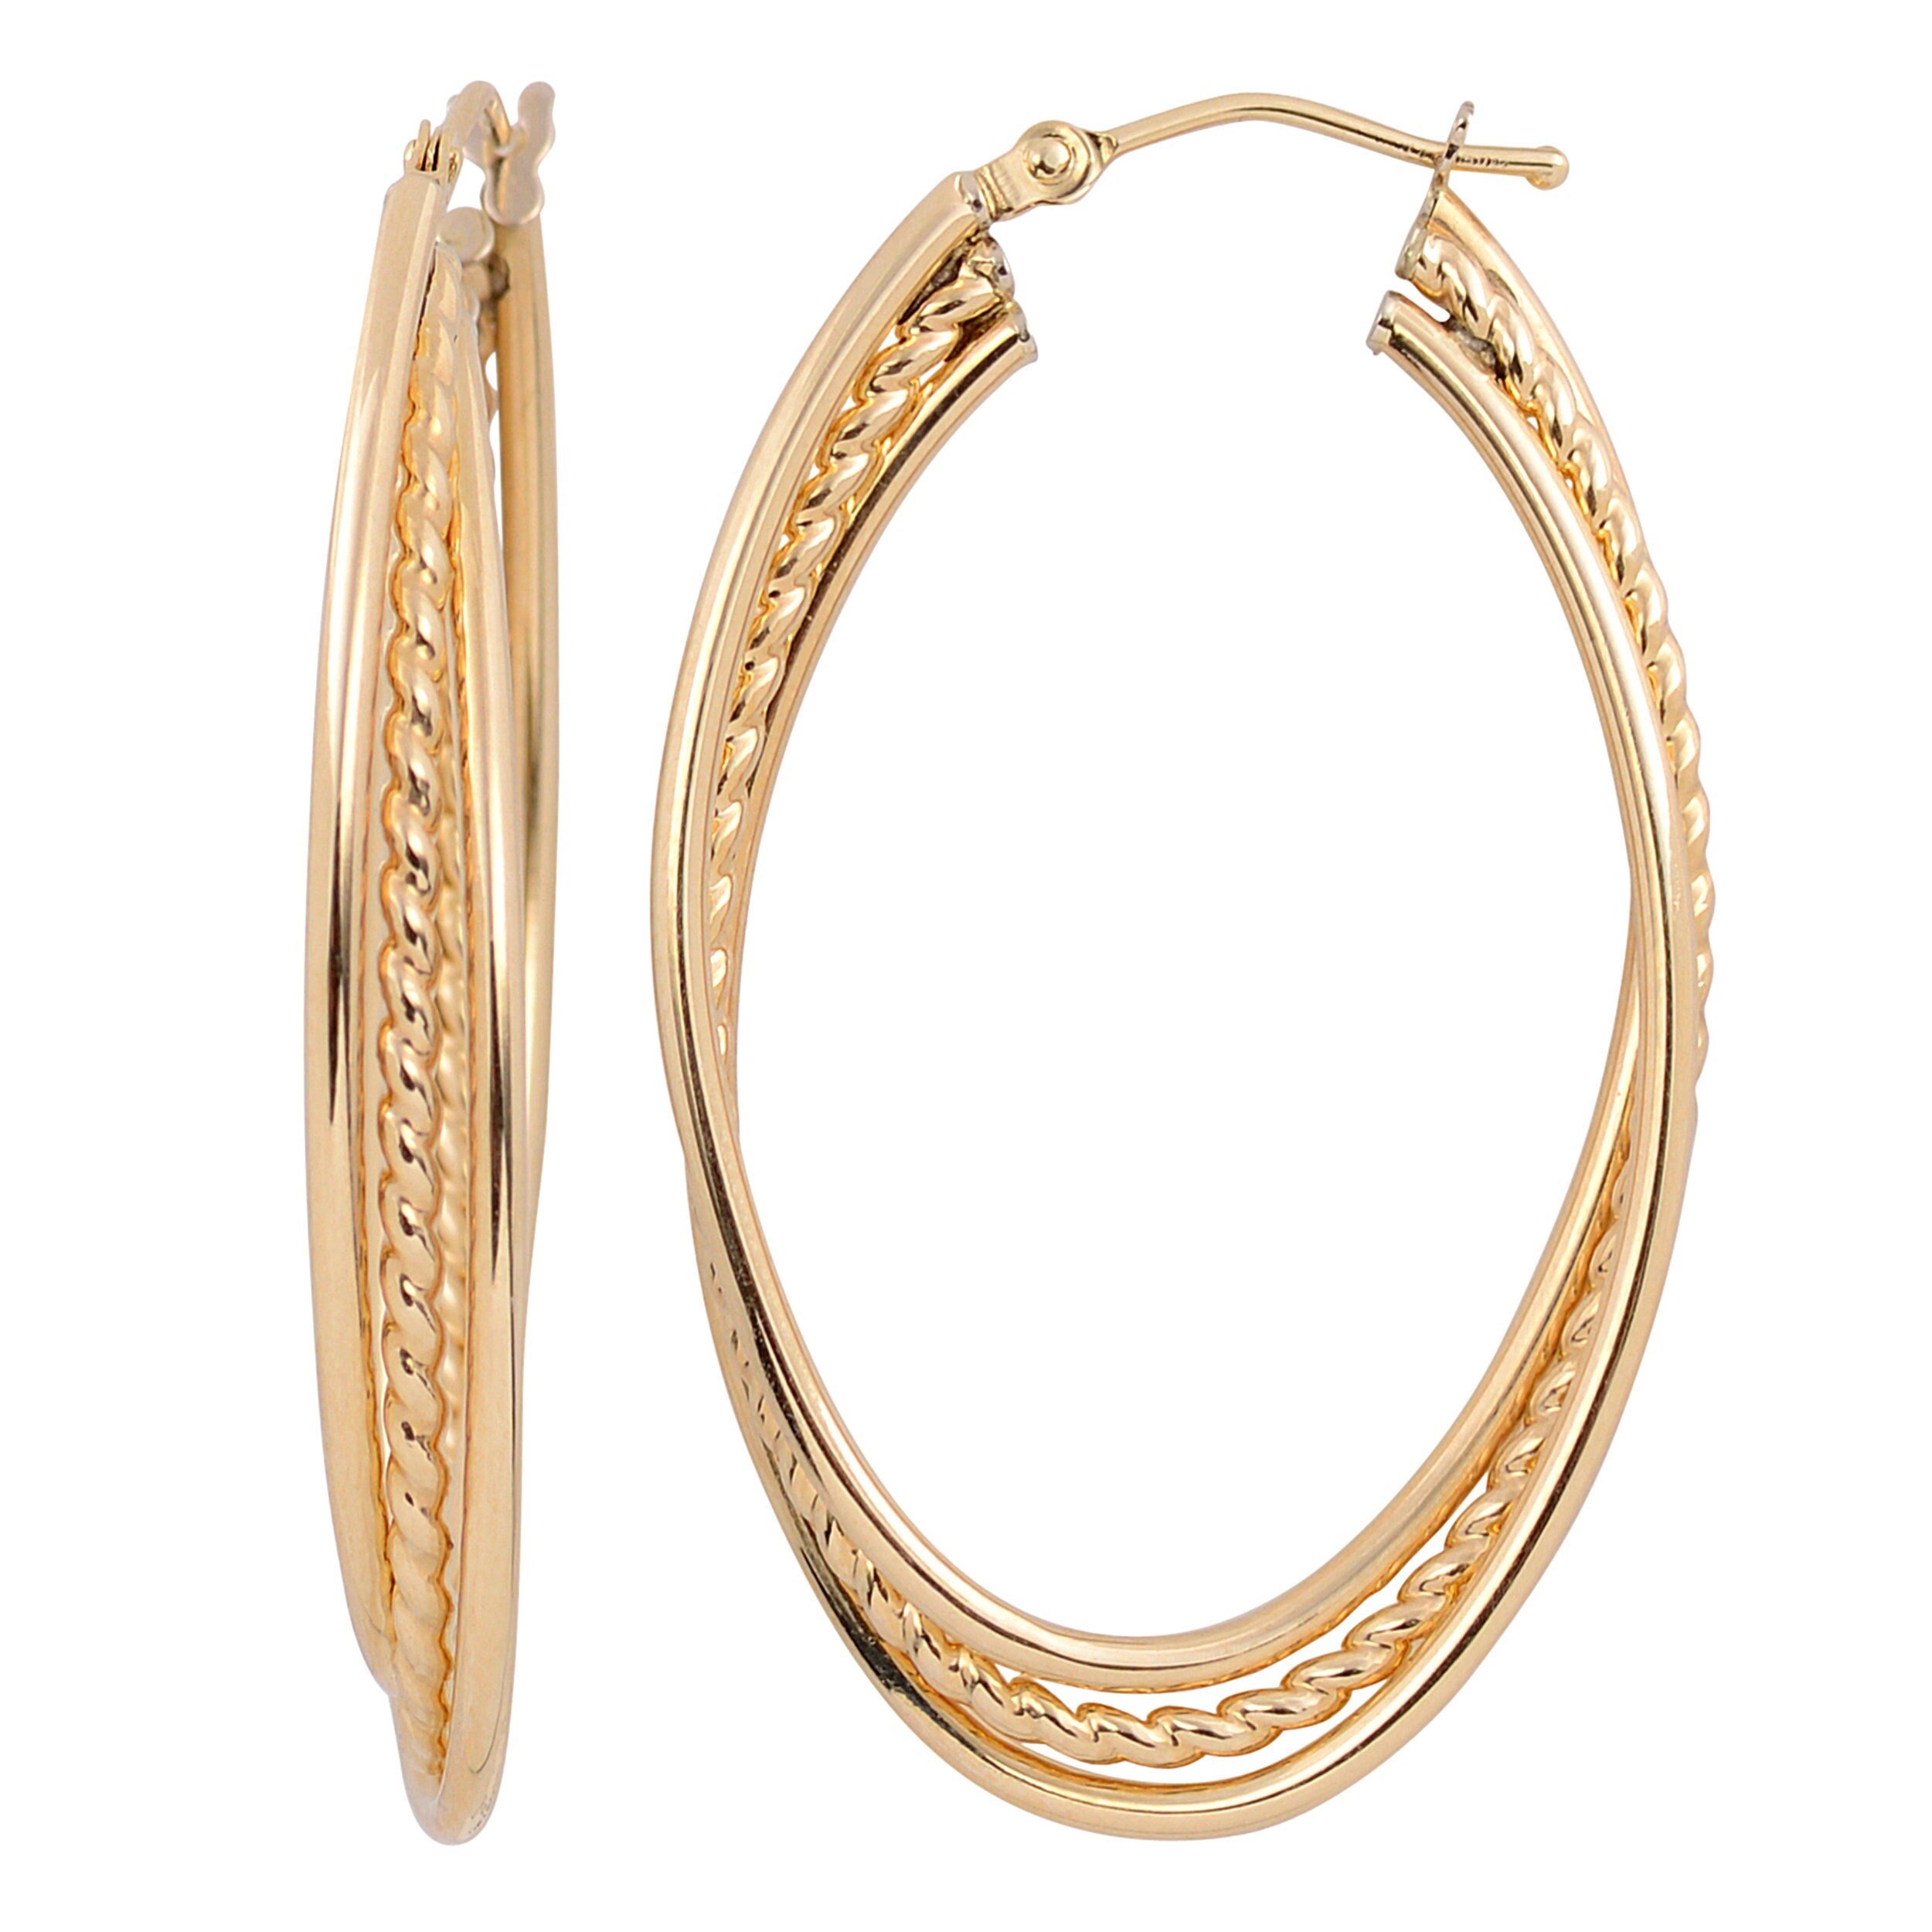 10k Yellow Gold Overlapping Oval Hoop Earrings - Etsy